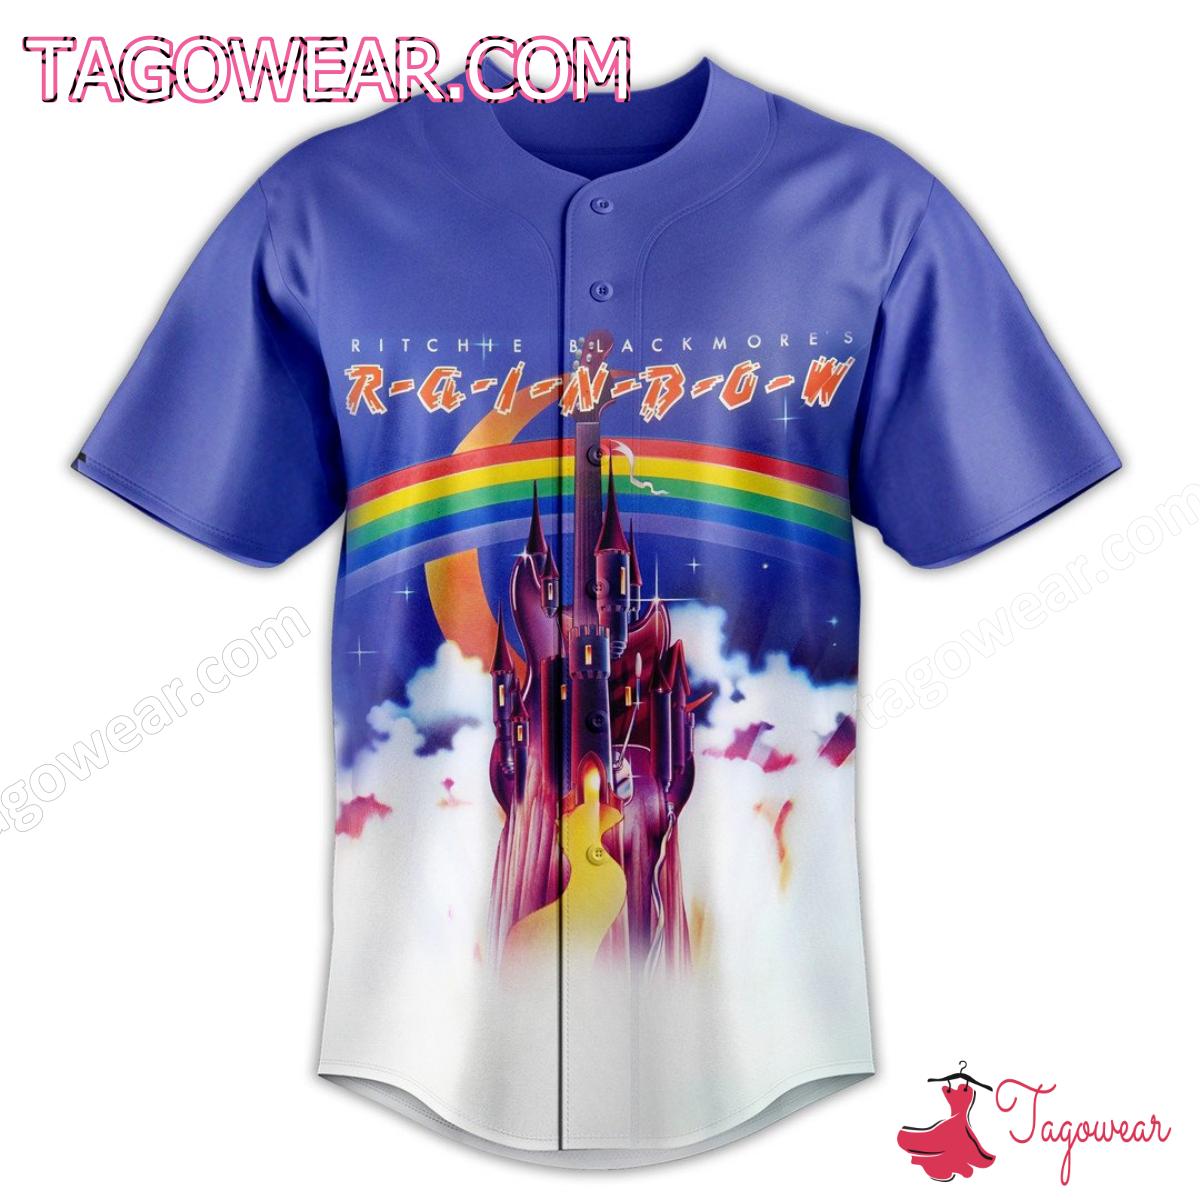 Ritchie Blackmore's Rainbow Album Cover Baseball Jersey a